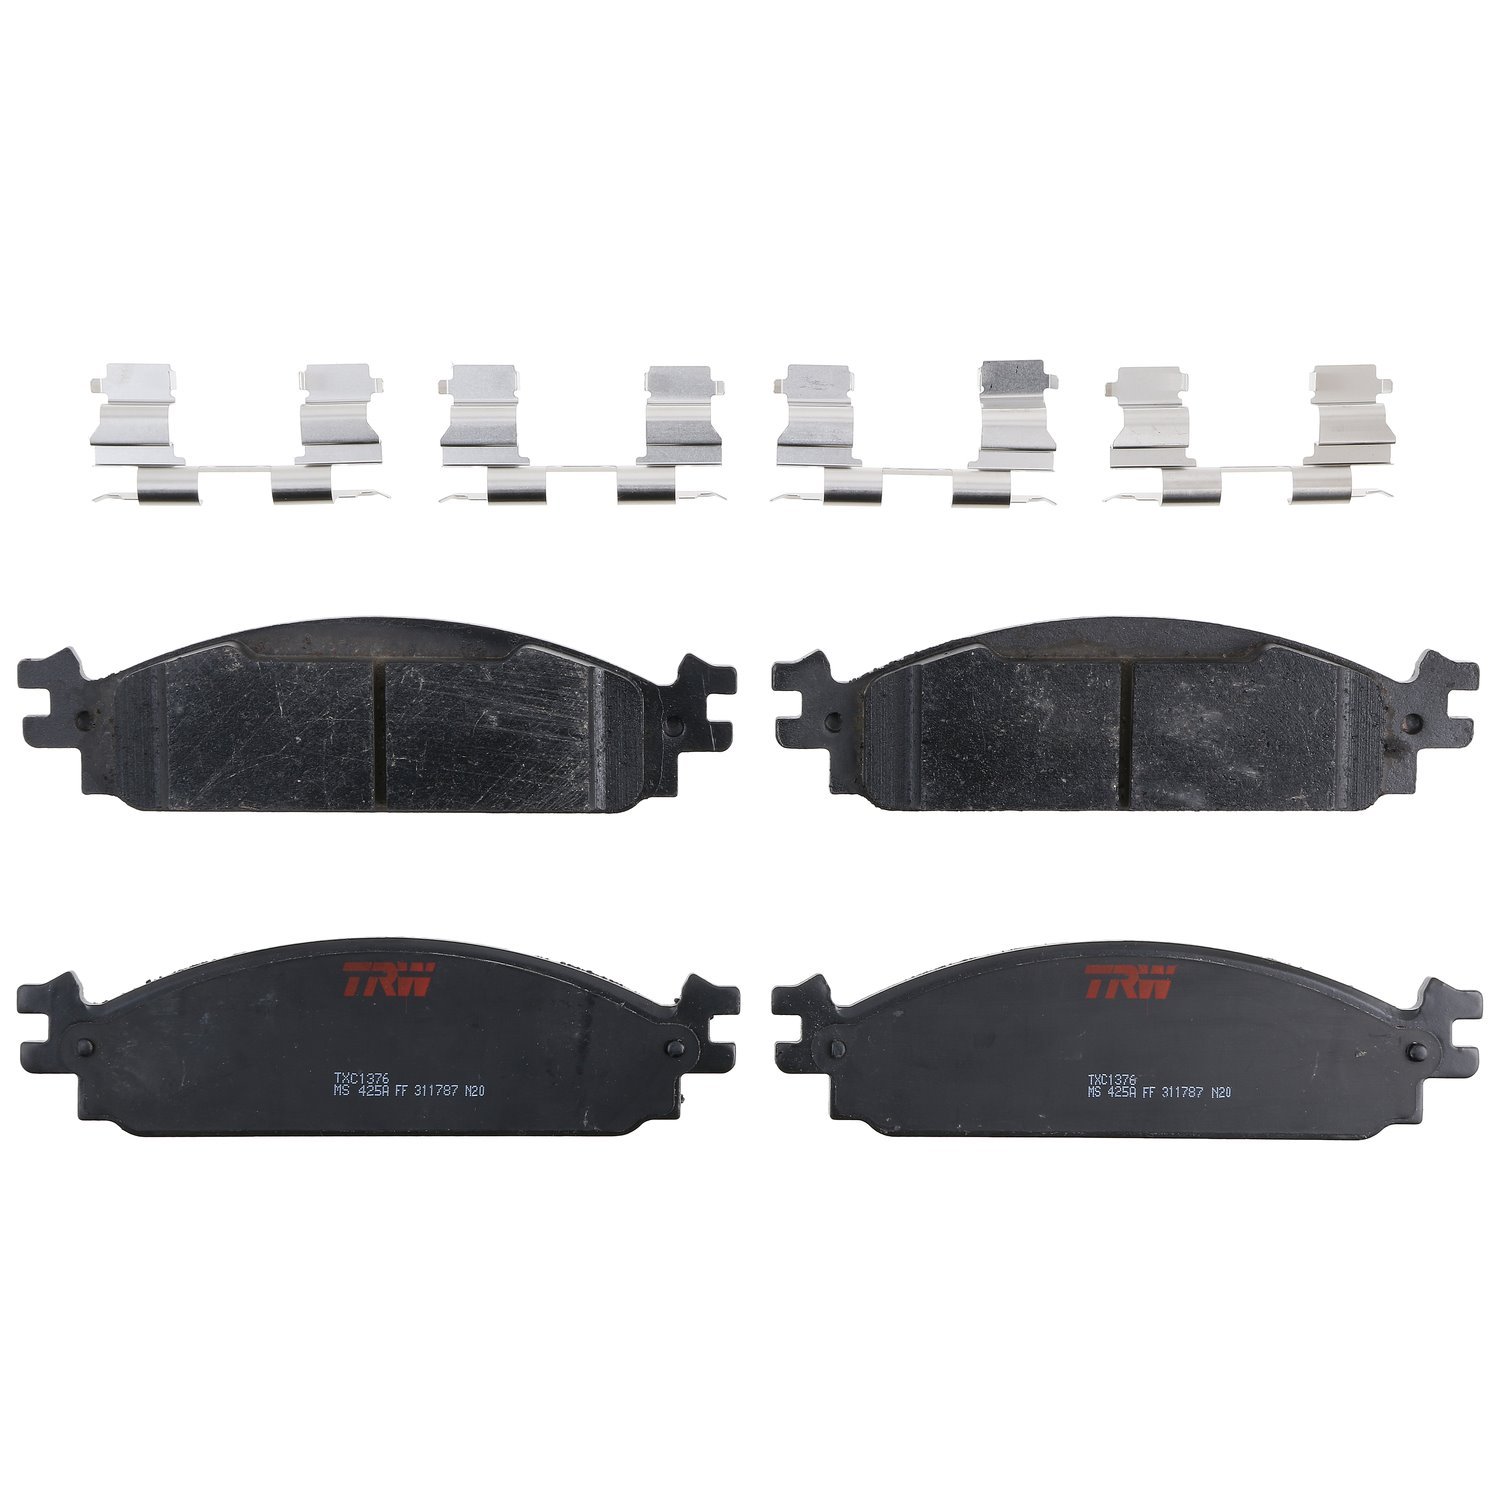 TXC1376 Ultra-Series Disc Brake Pad Set for Ford Flex 2011-2009, Taurus 2011-2010, Lincoln MKS/MKT 2011-2009, Position: Front